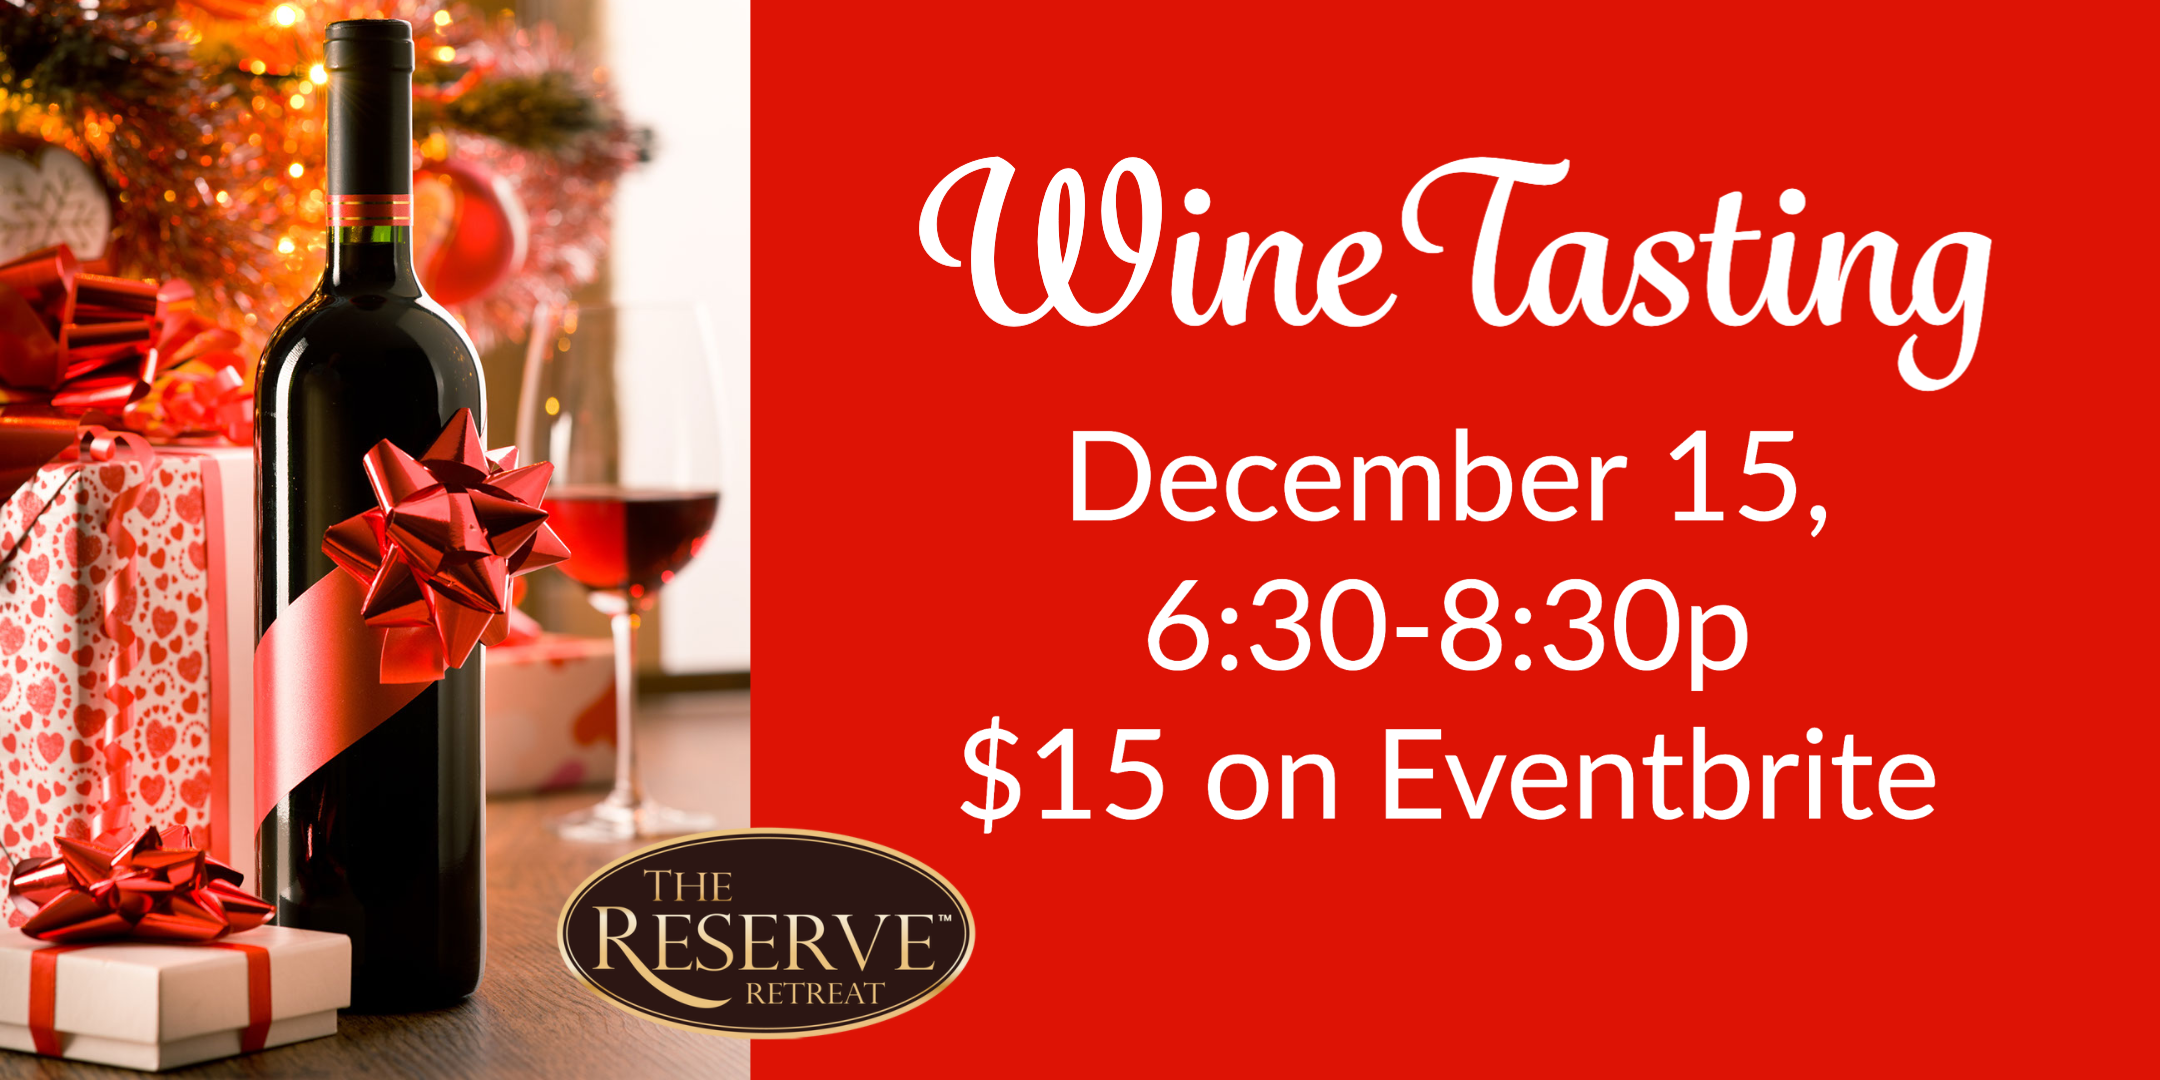 Join us at The Reserve Retreat on December 15 for our monthly wine tasting.